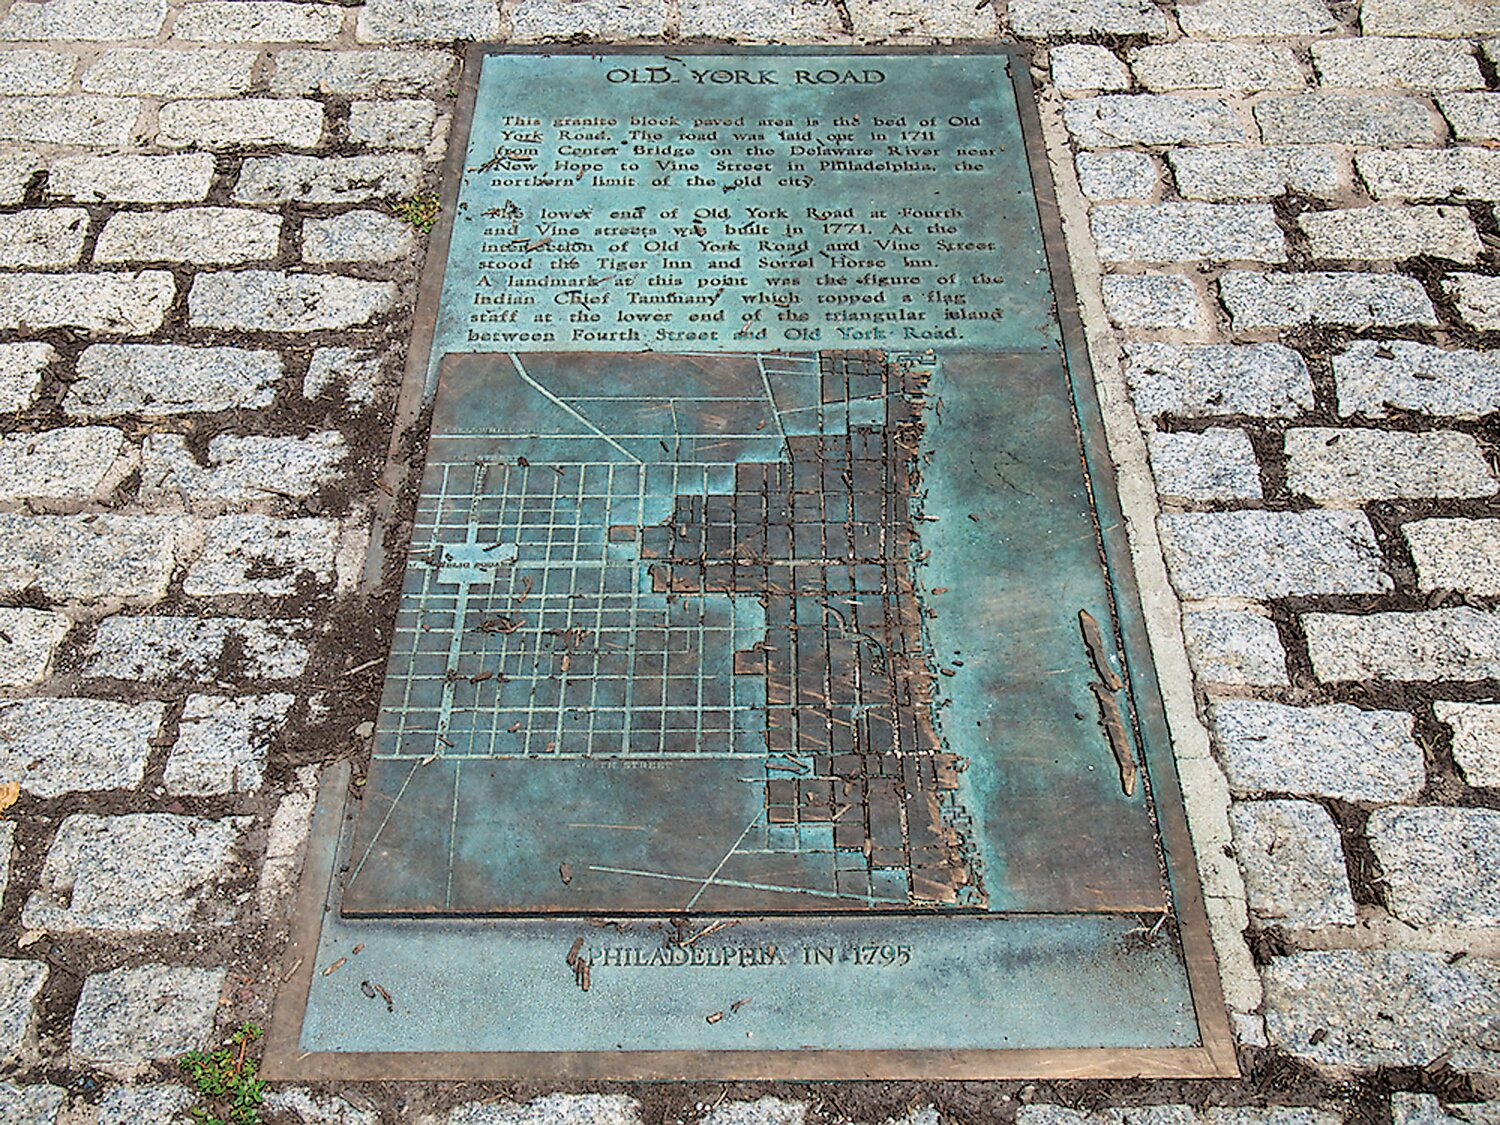 A memorial to Old York Road is located at 4th and Vine streets in Philadelphia.